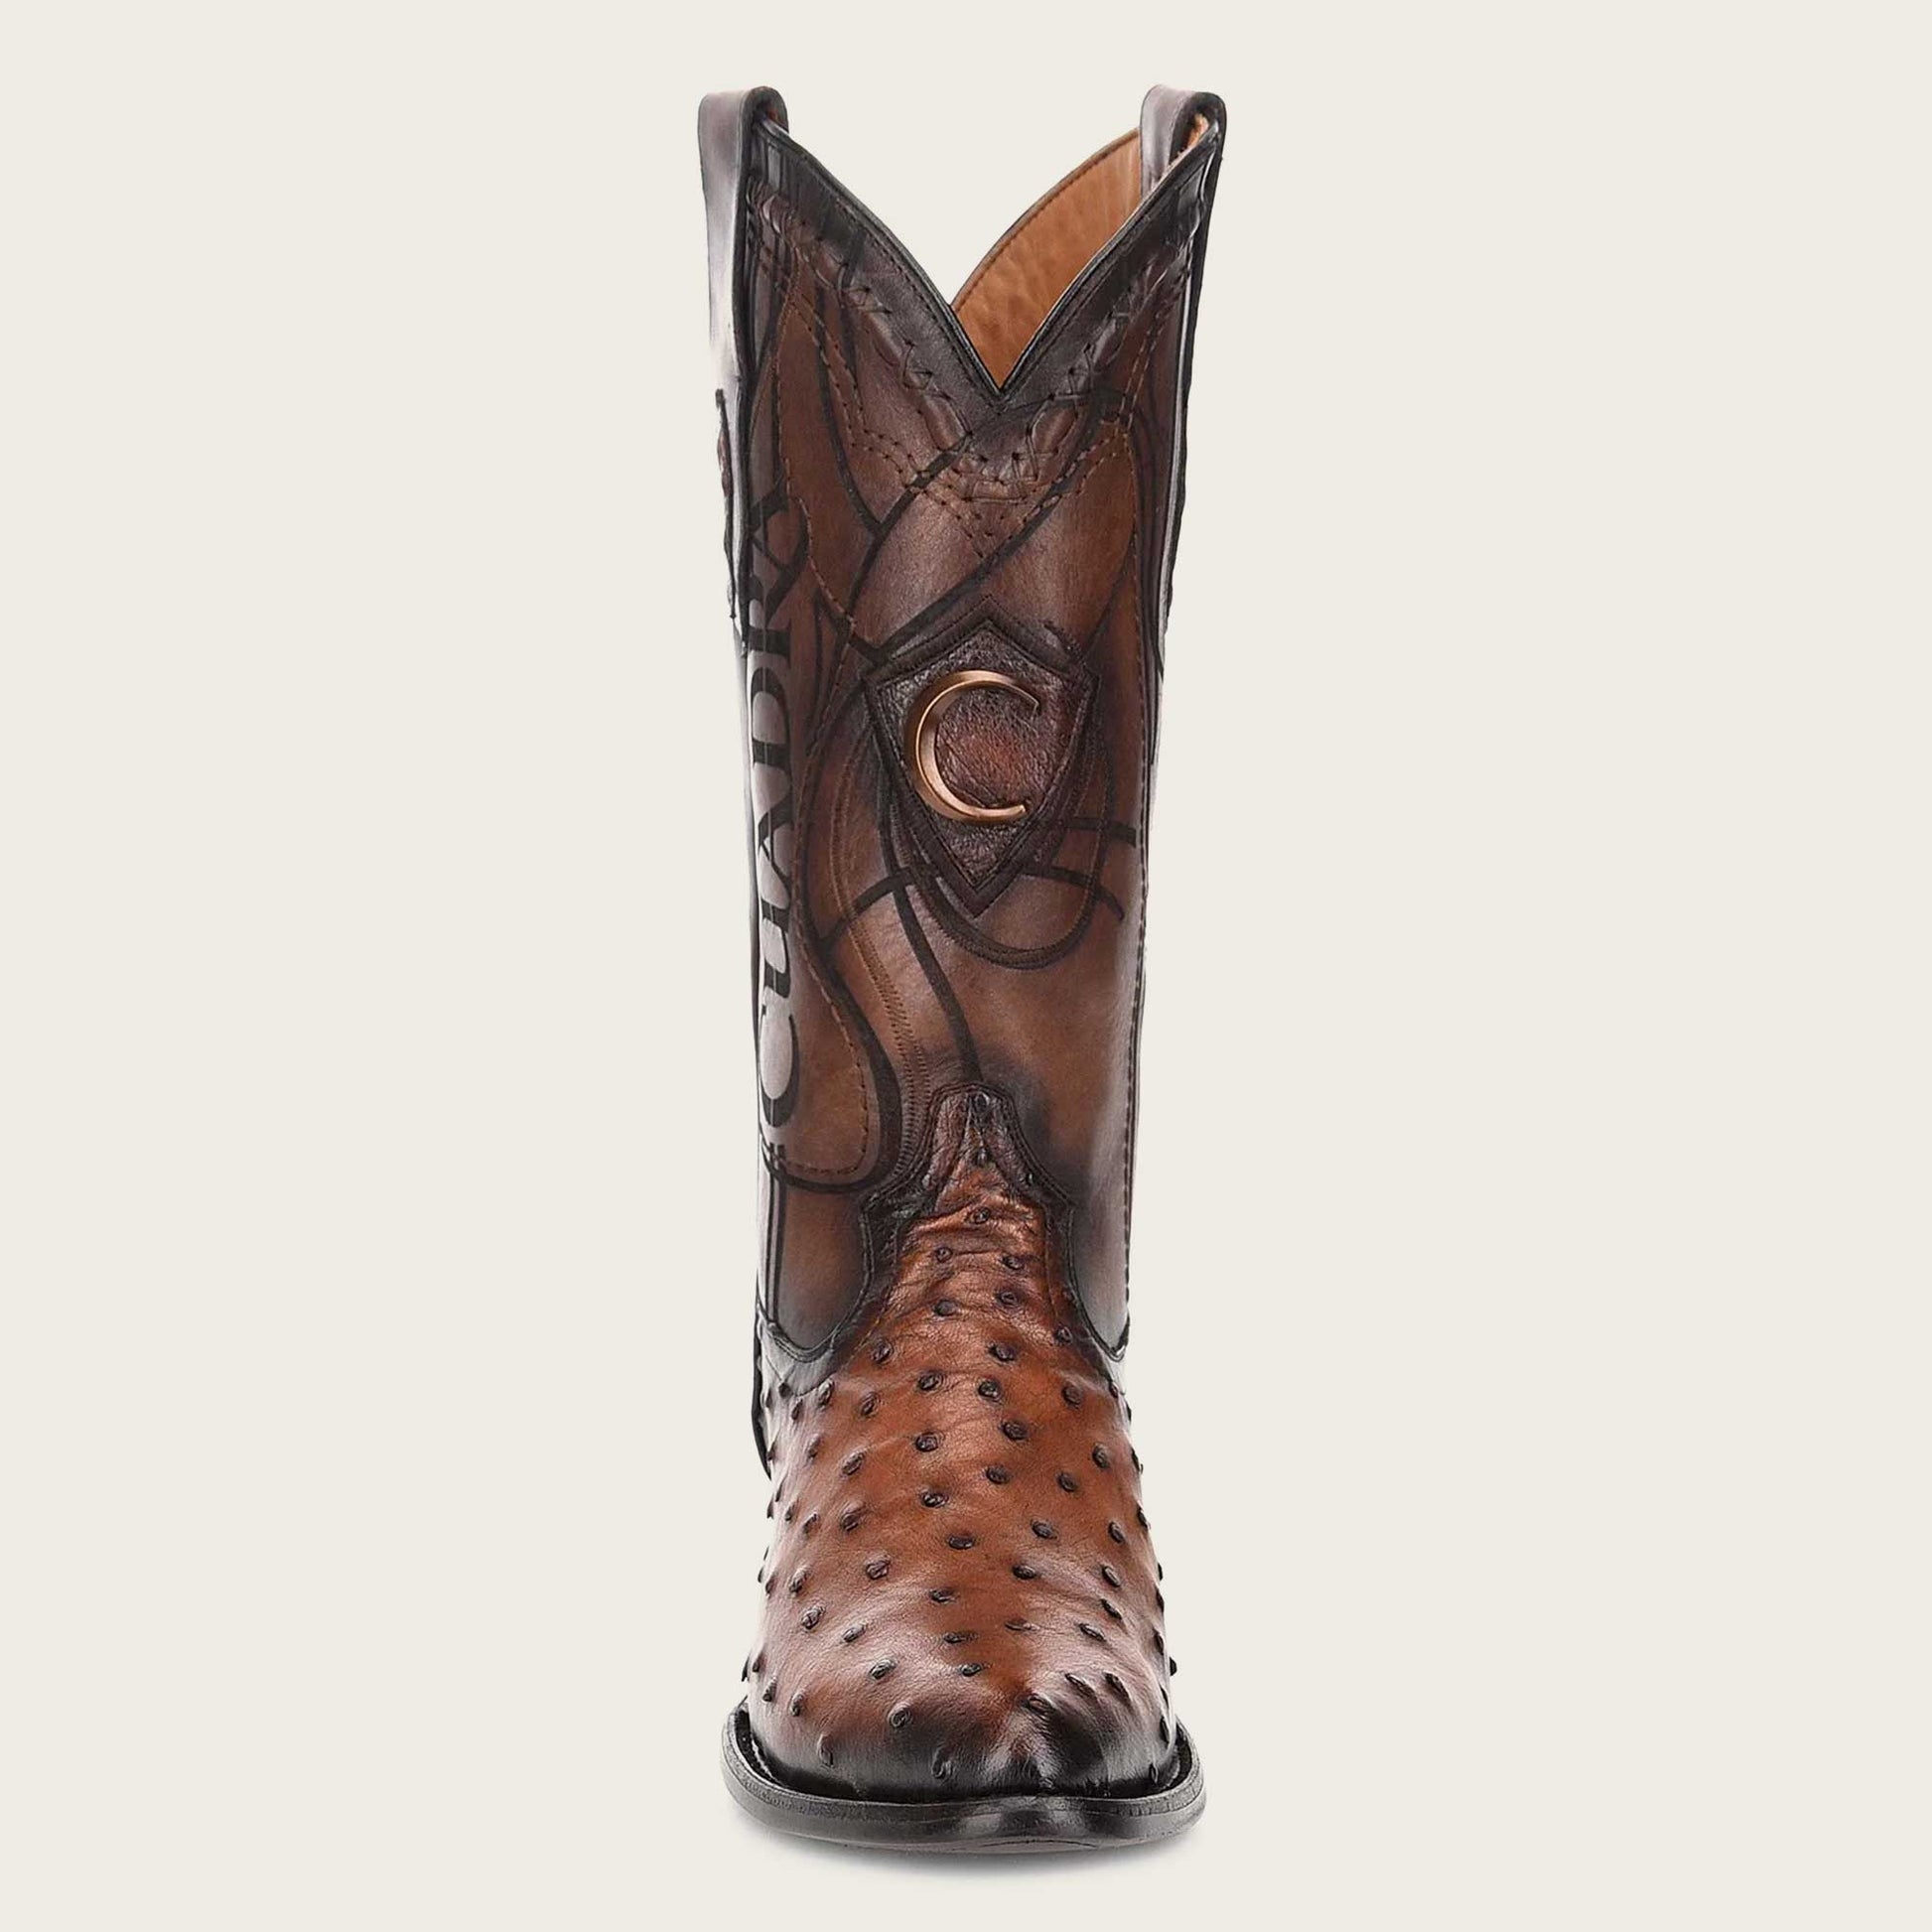 Metallic Cuadra monogram make these boots truly charming and sophisticated.